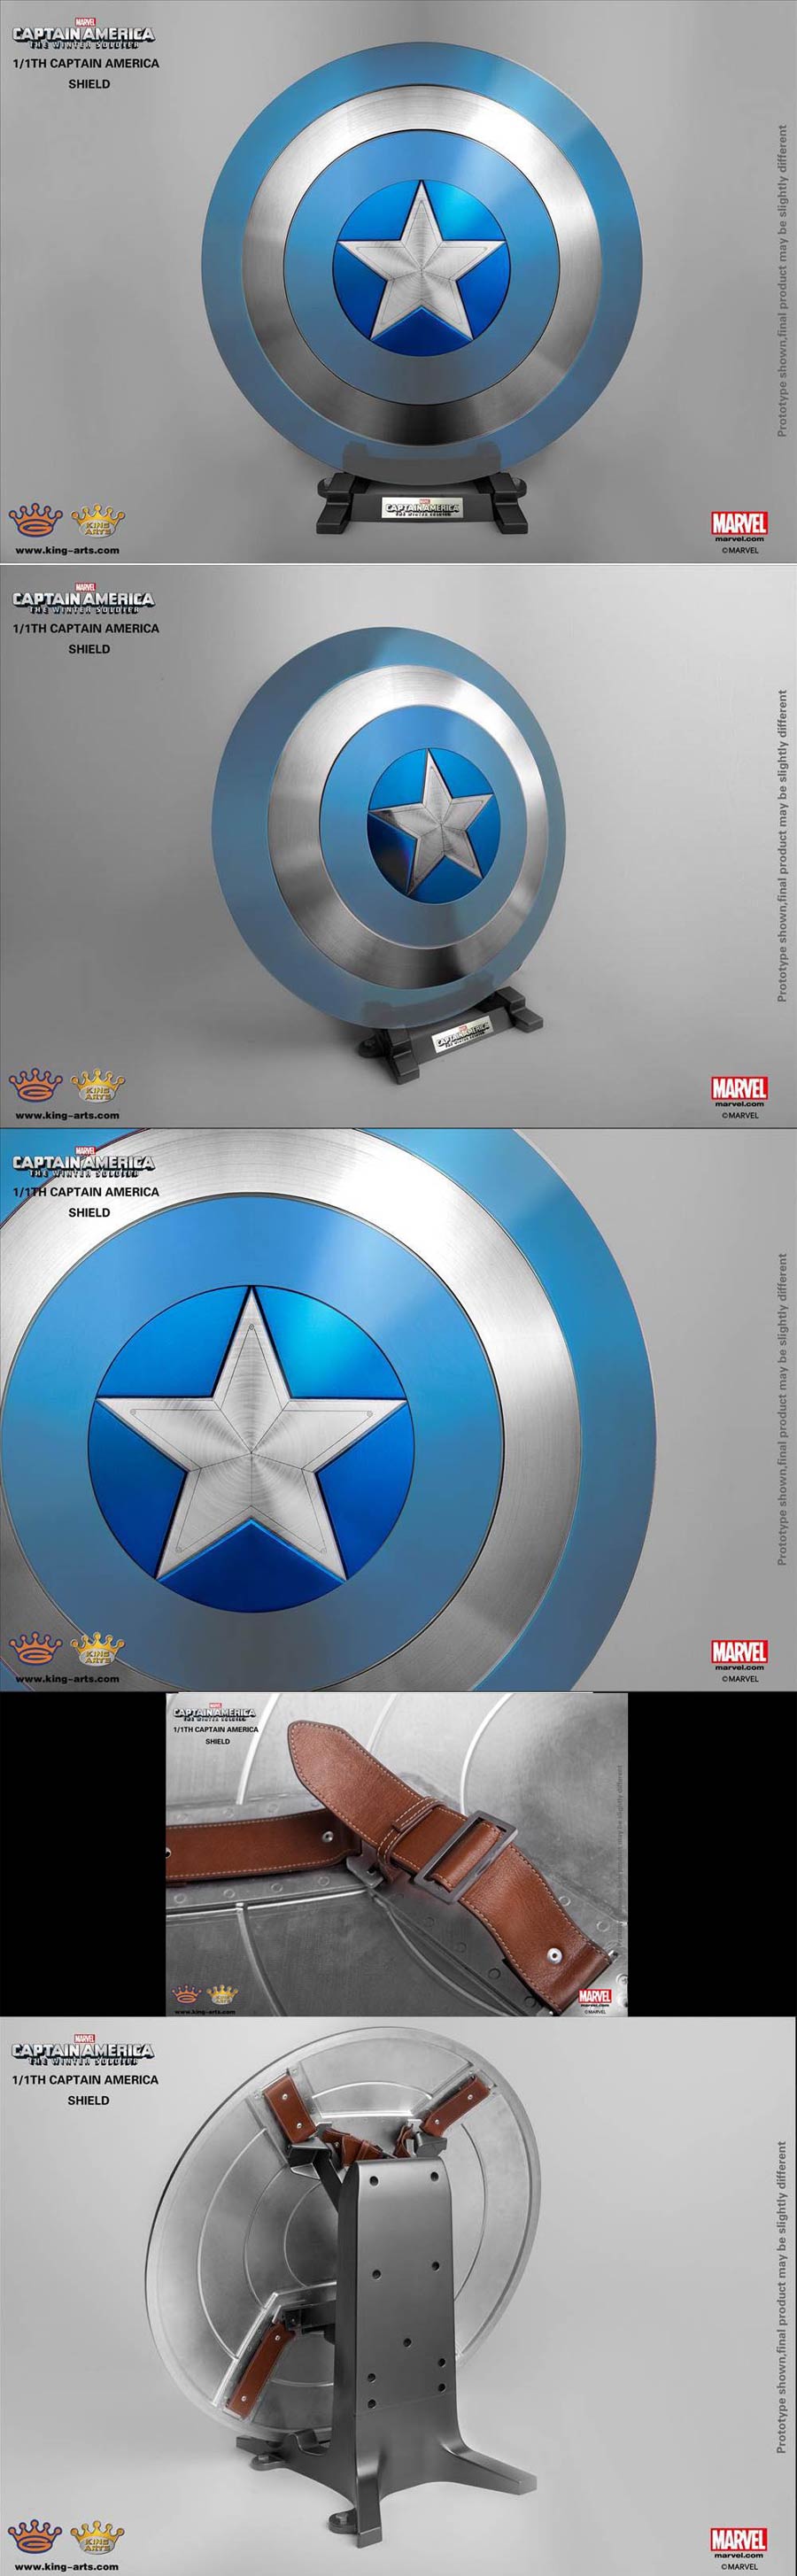 Captain America The Winter Soldier 1/1 Scale Shield Replica - Stealth Shield With Display Stand